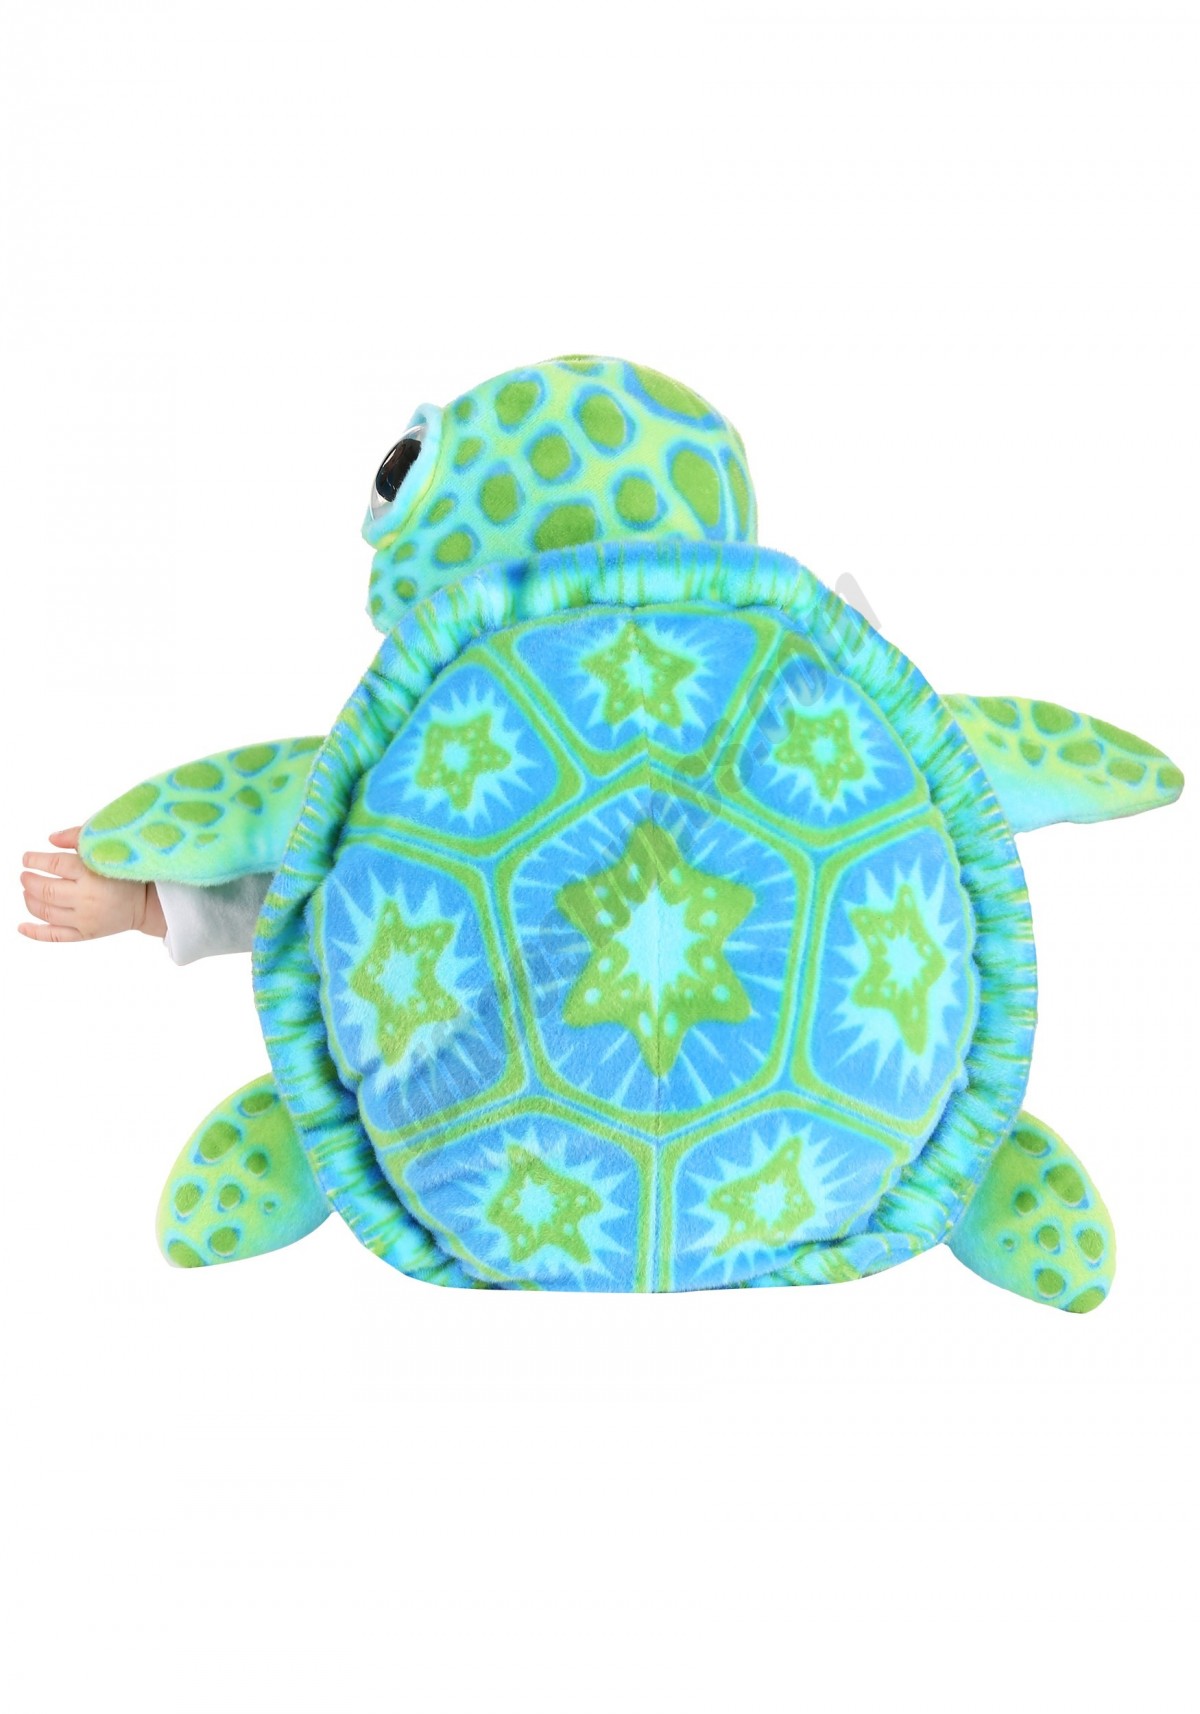 Sea Turtle Costume for Infants Promotions - -1